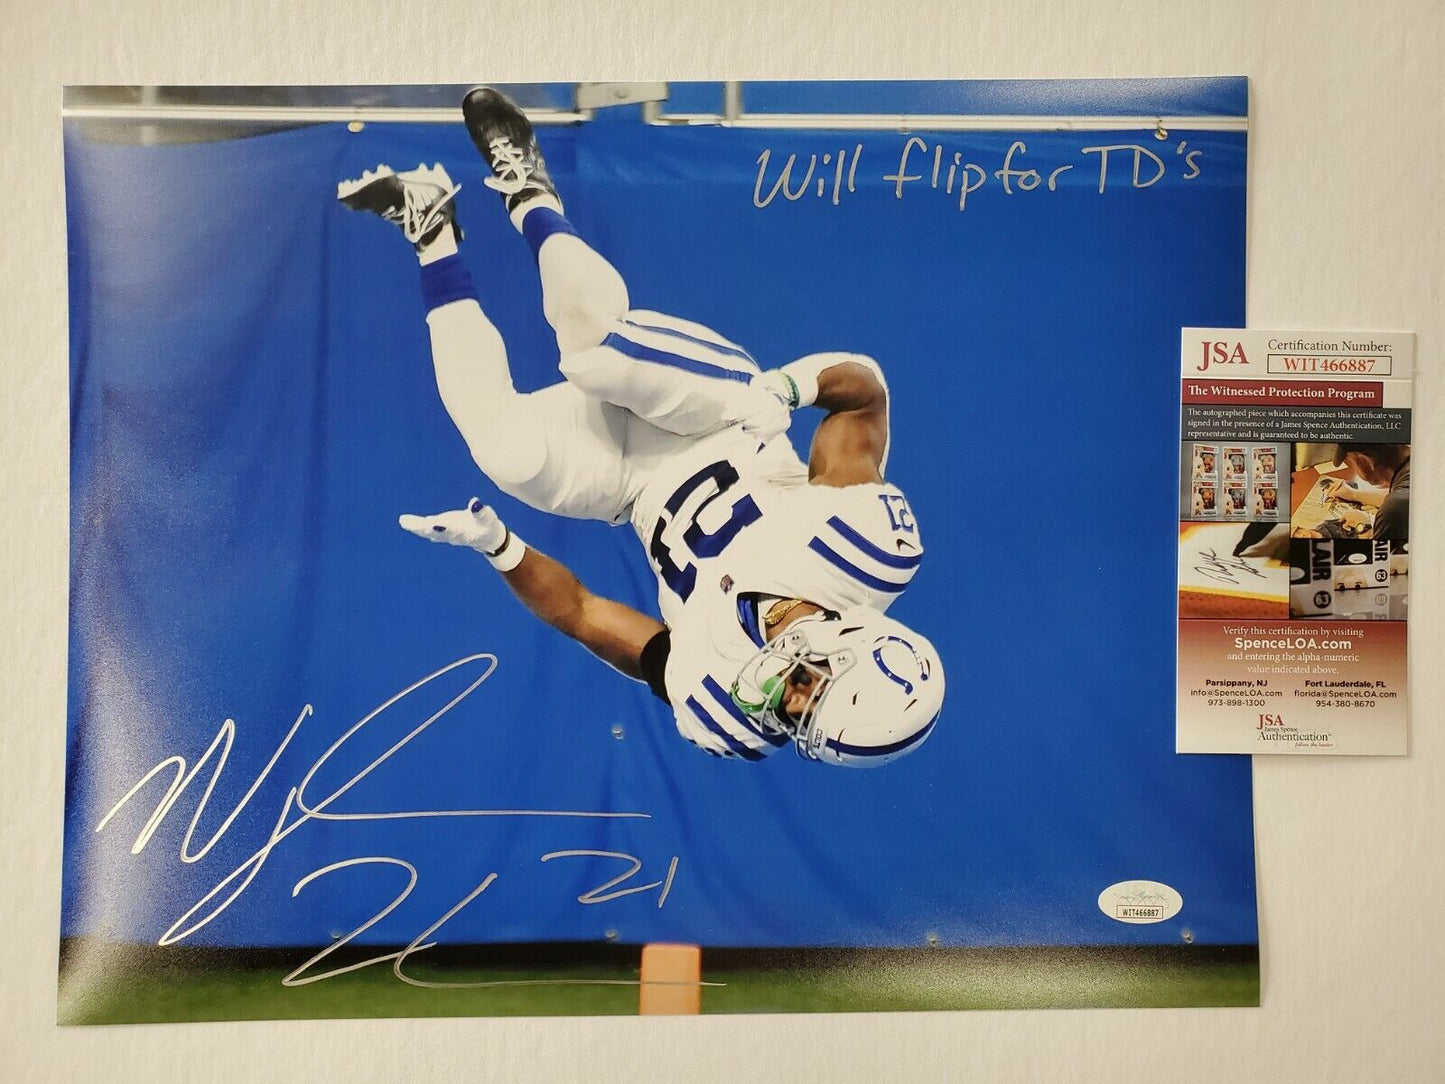 MVP Authentics Indianapolis Colts Nyheim Hines Autographed Inscribed 11X14 Photo Jsa Coa 89.10 sports jersey framing , jersey framing